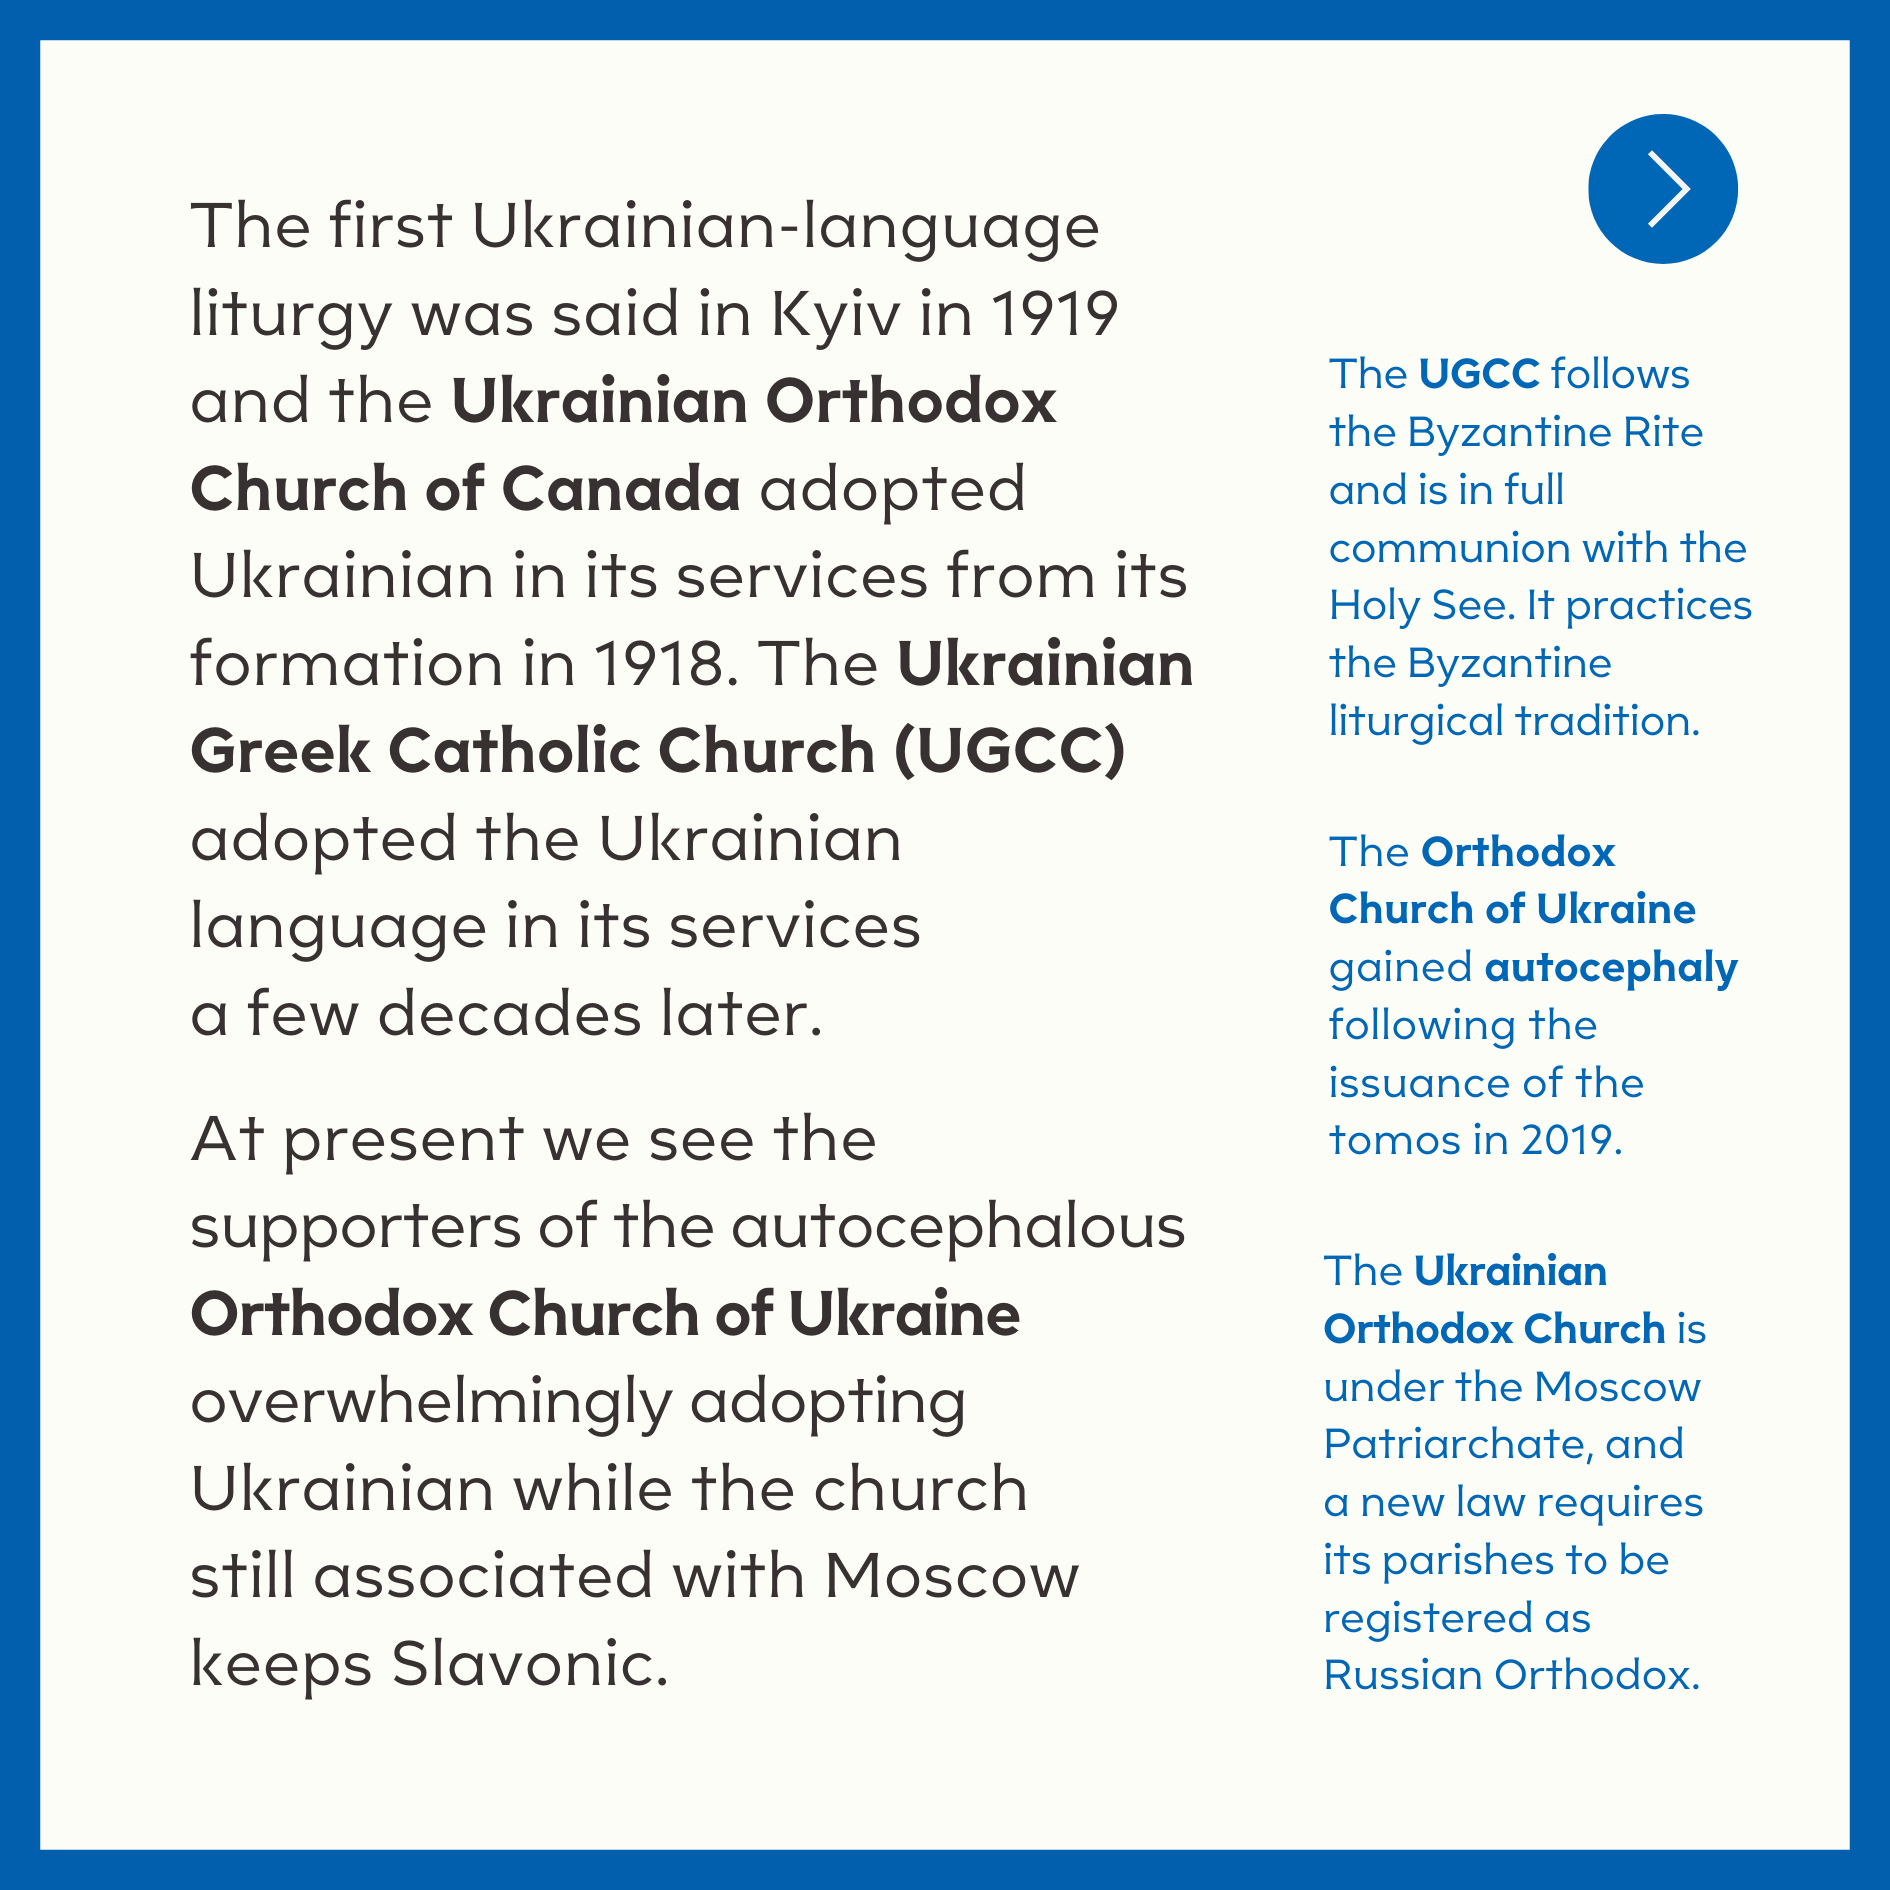  The first Ukrainian-language liturgy was said in Kyiv in 1919 and the Ukrainian Orthodox Church of Canada adopted Ukrainian in its services from its formation in 1918. The Ukrainian Greek Catholic Church (UGCC) adopted the Ukrainian language in its 